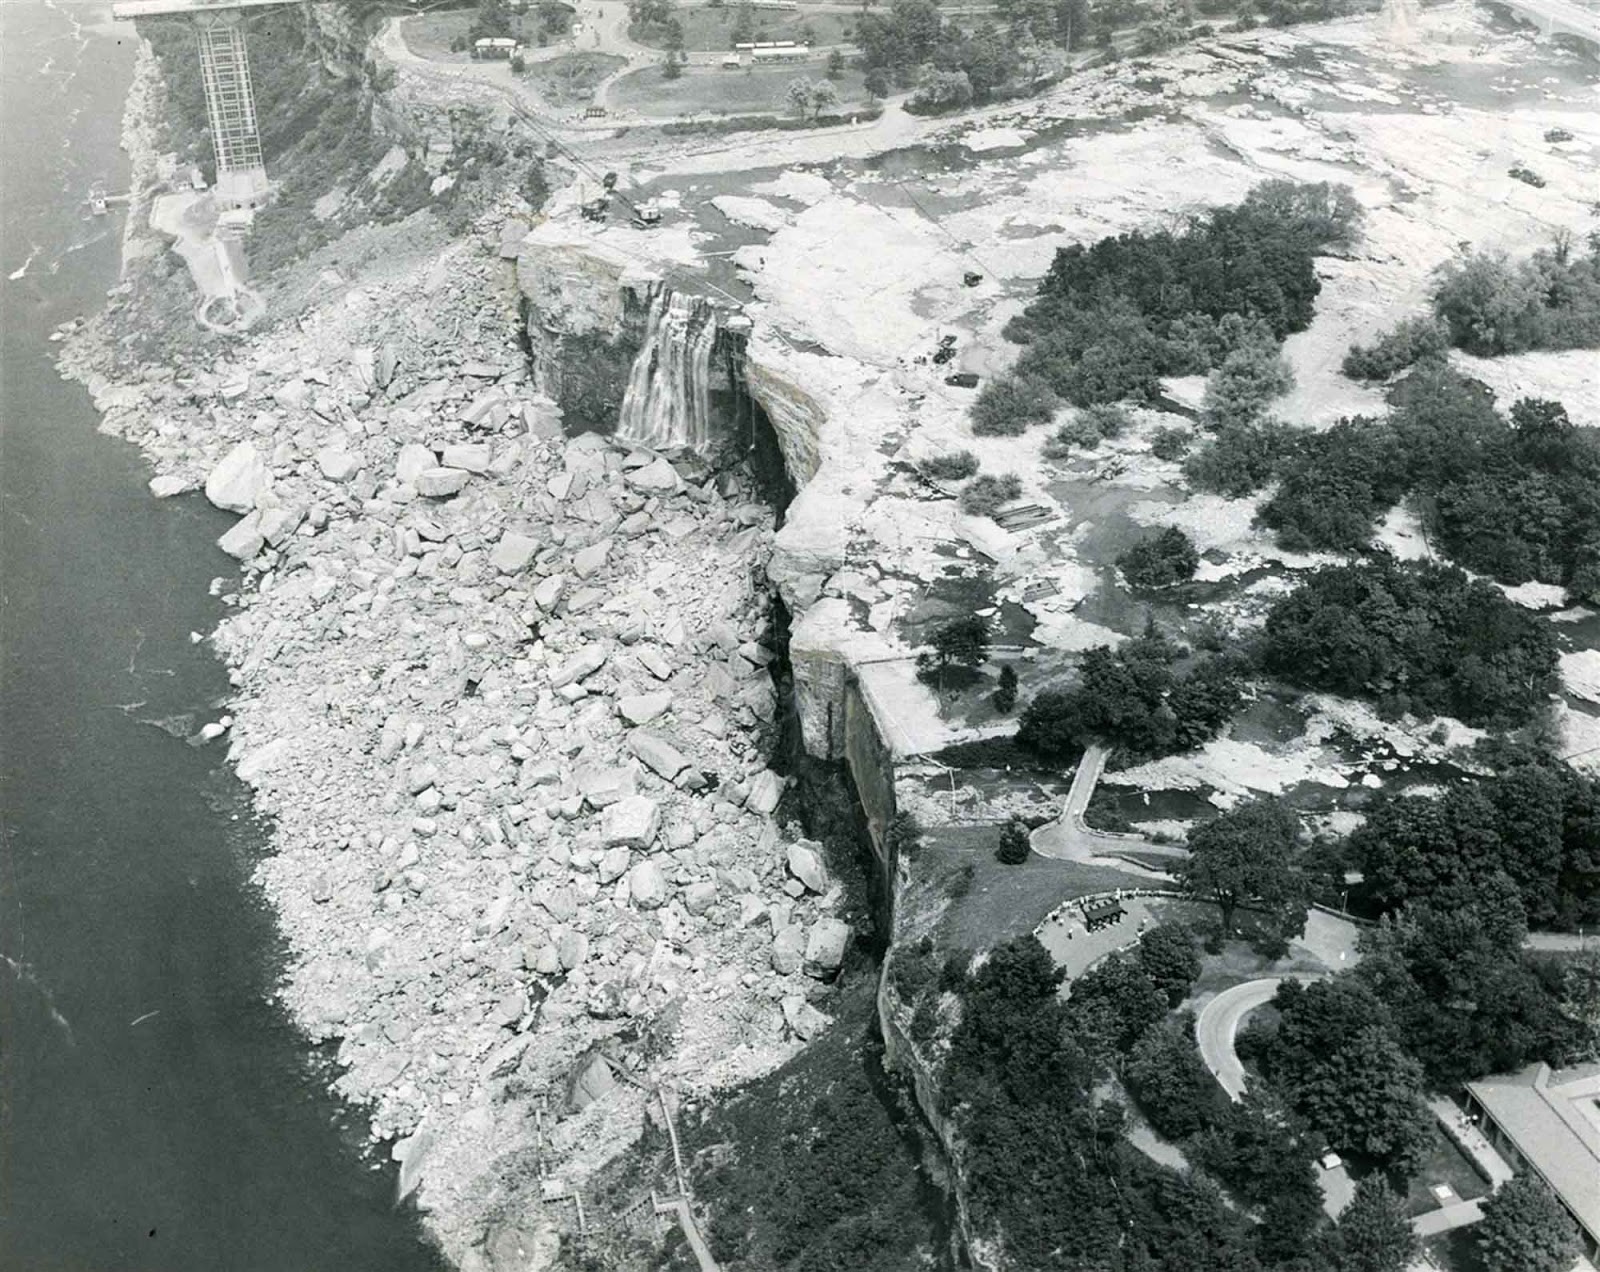 During this time, two bodies were removed from under the falls, including a man who had been seen jumping over the falls, and the body of a woman, which was discovered once the falls dried.